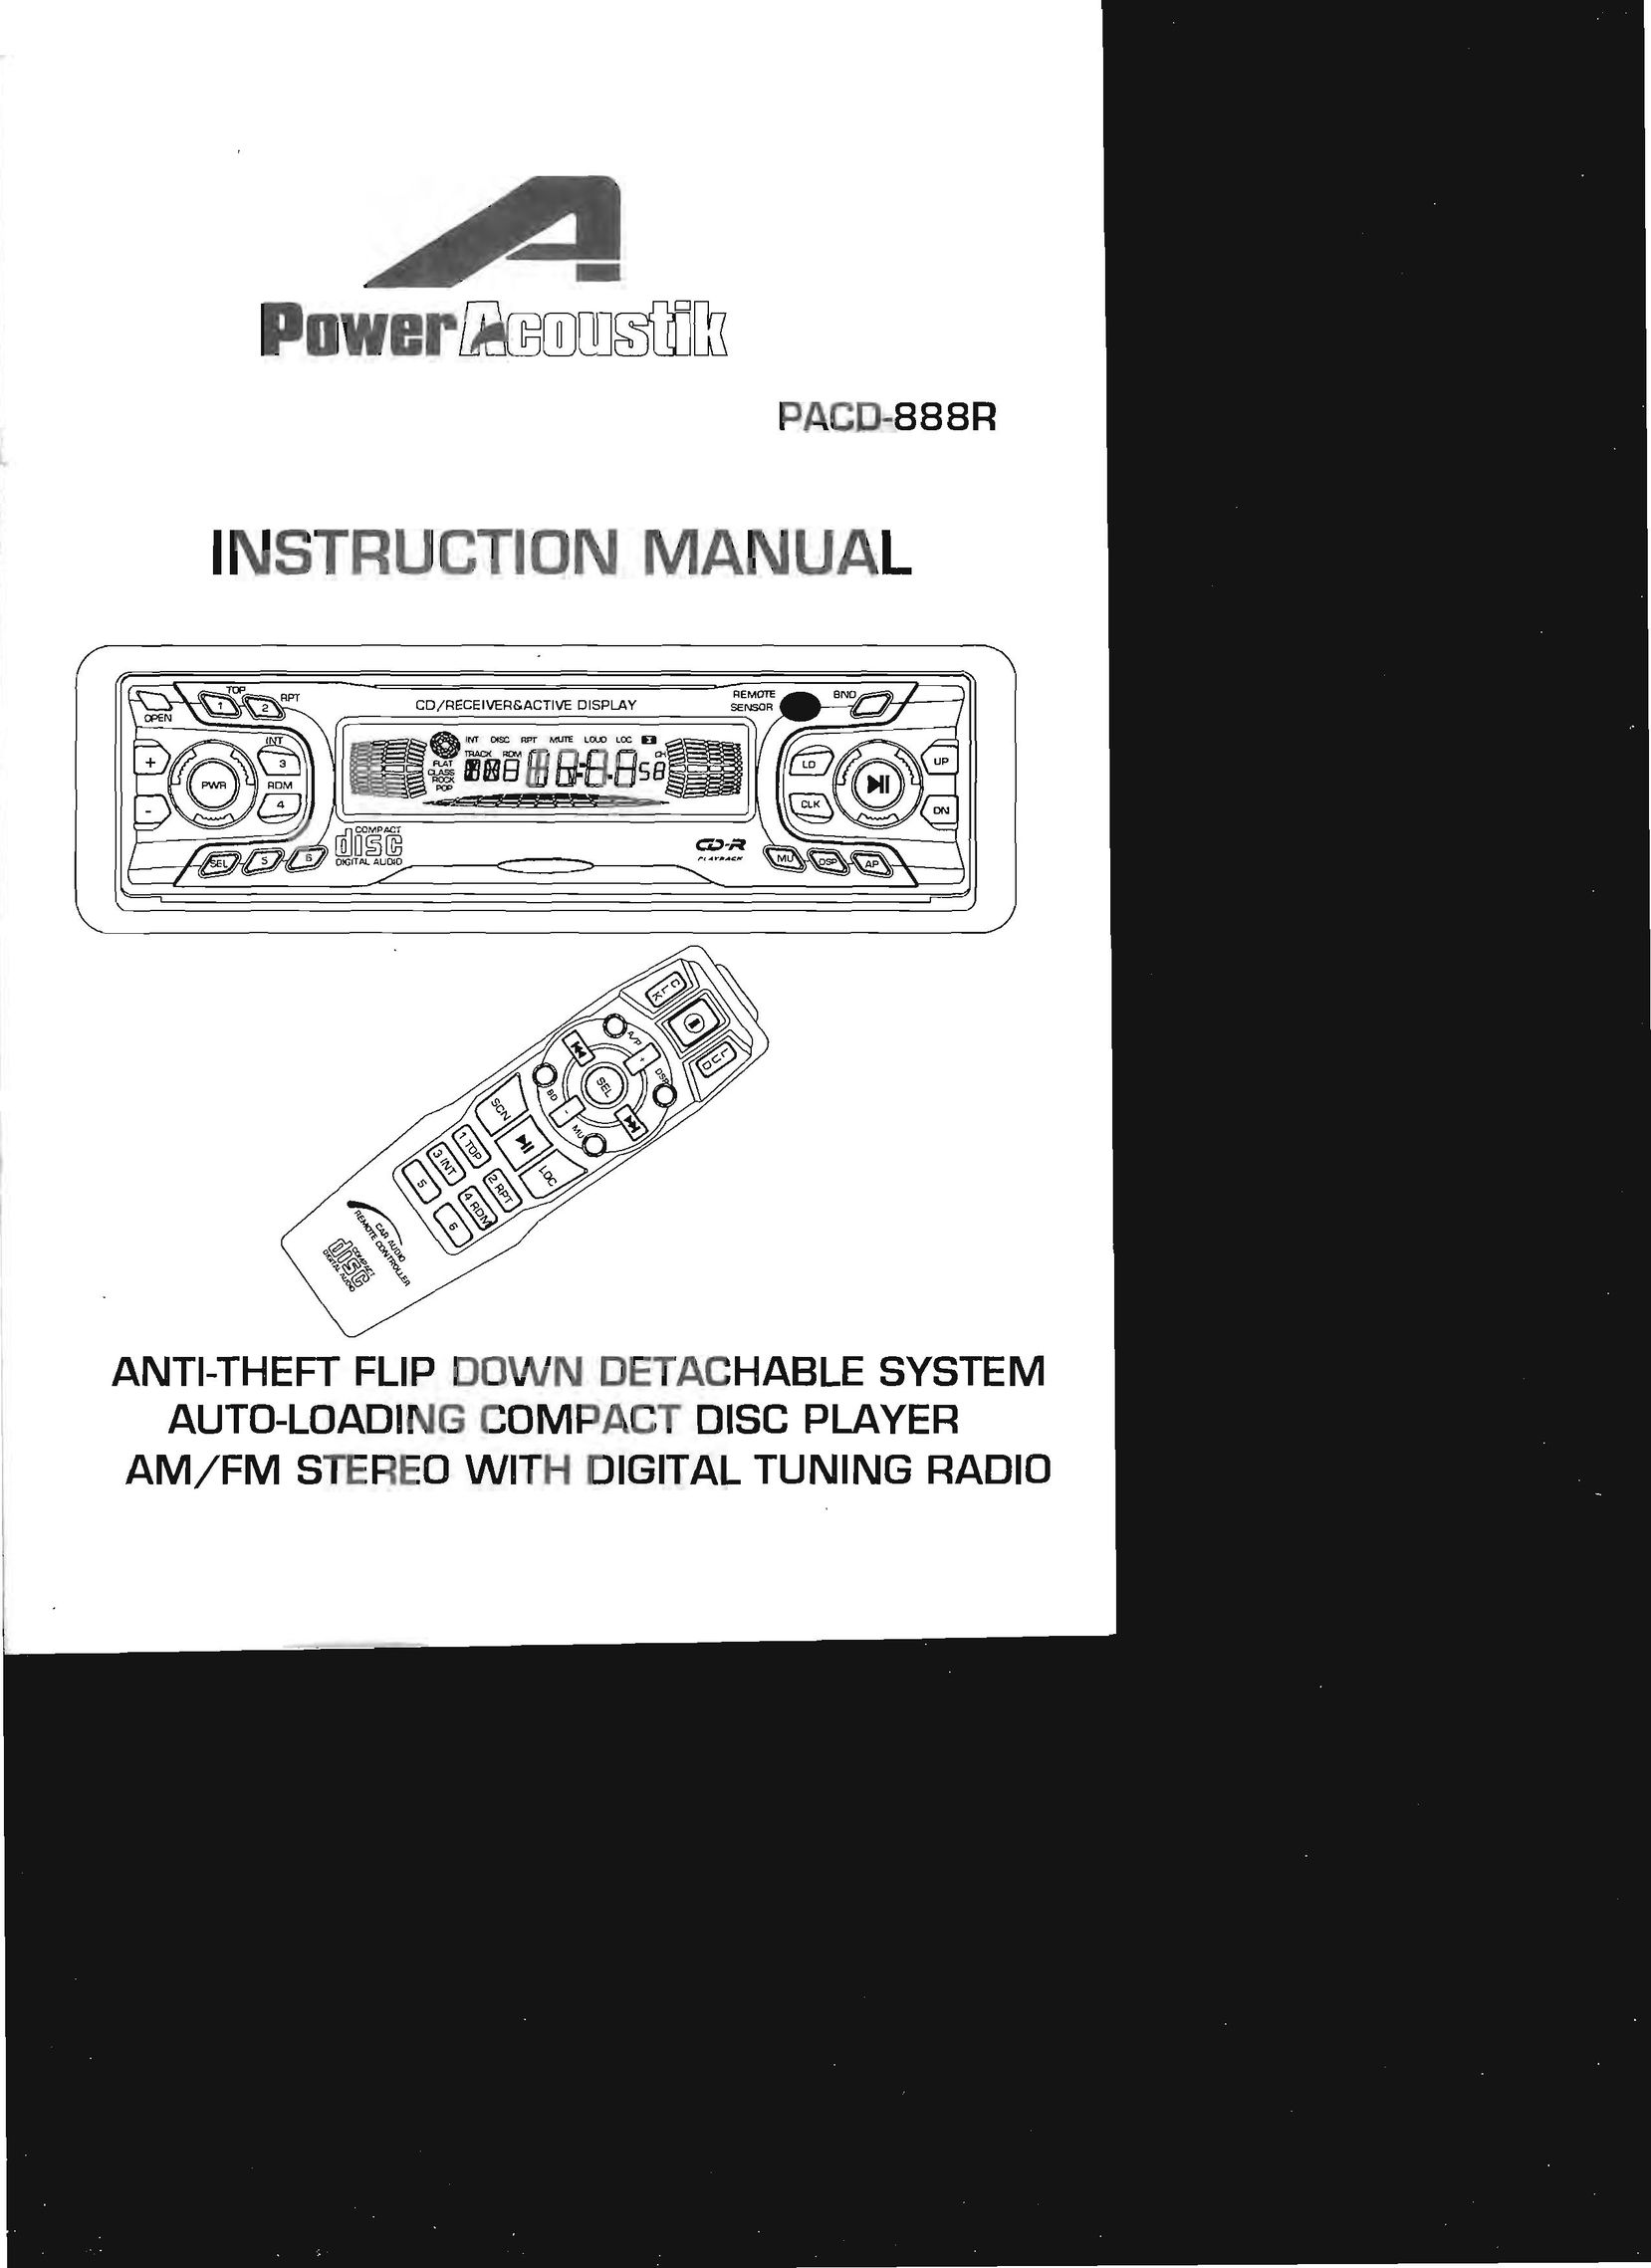 Power Acoustik PACD-889R Car Stereo System User Manual